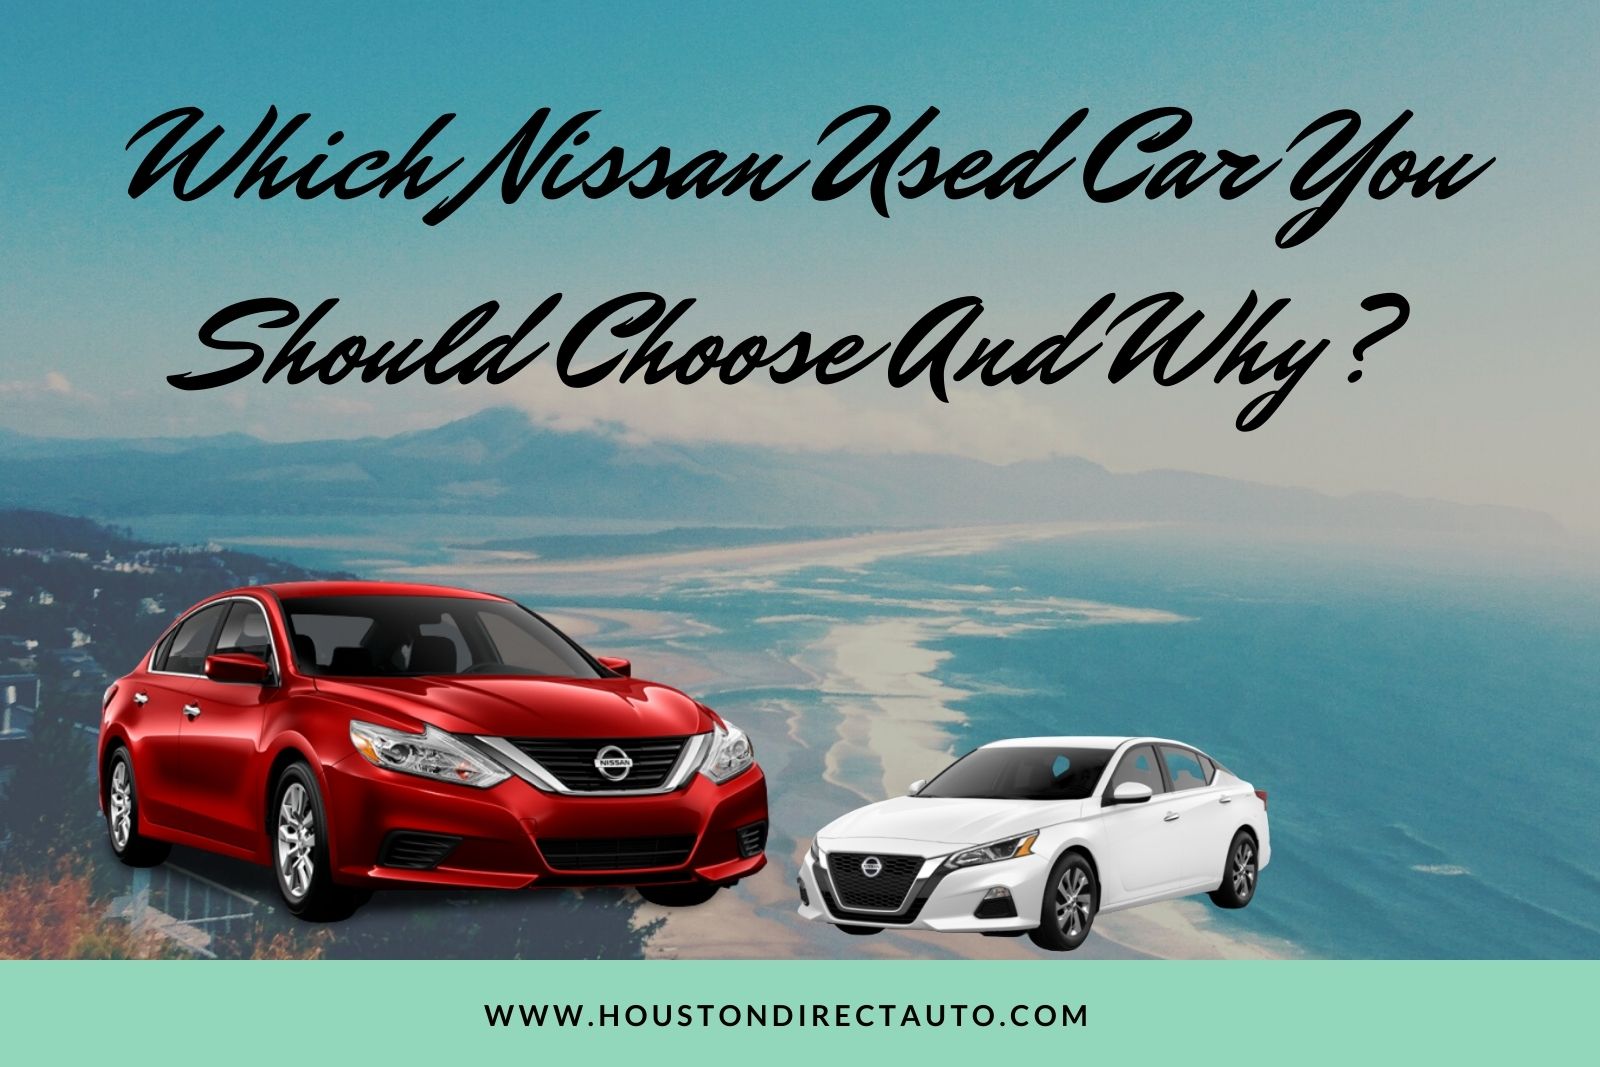 Which Nissan Used Car You Should Choose And Why?